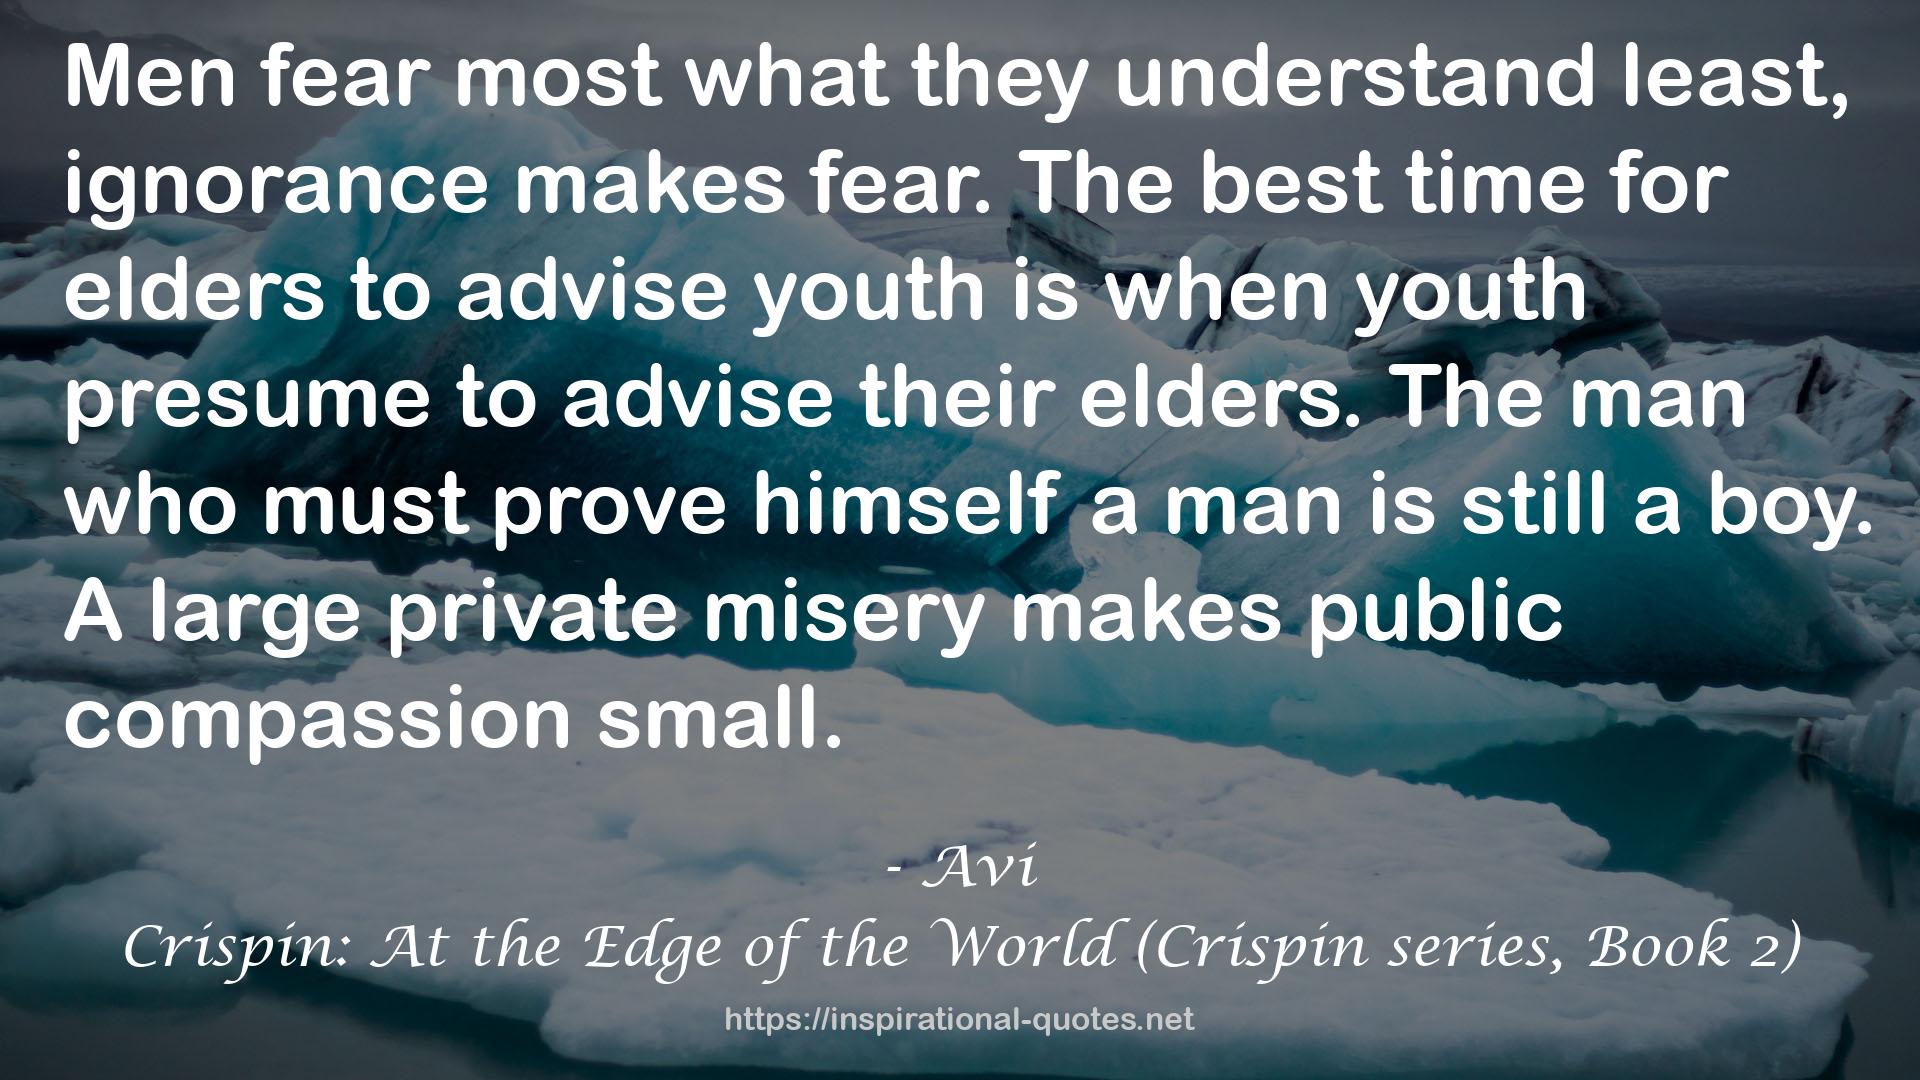 Crispin: At the Edge of the World (Crispin series, Book 2) QUOTES